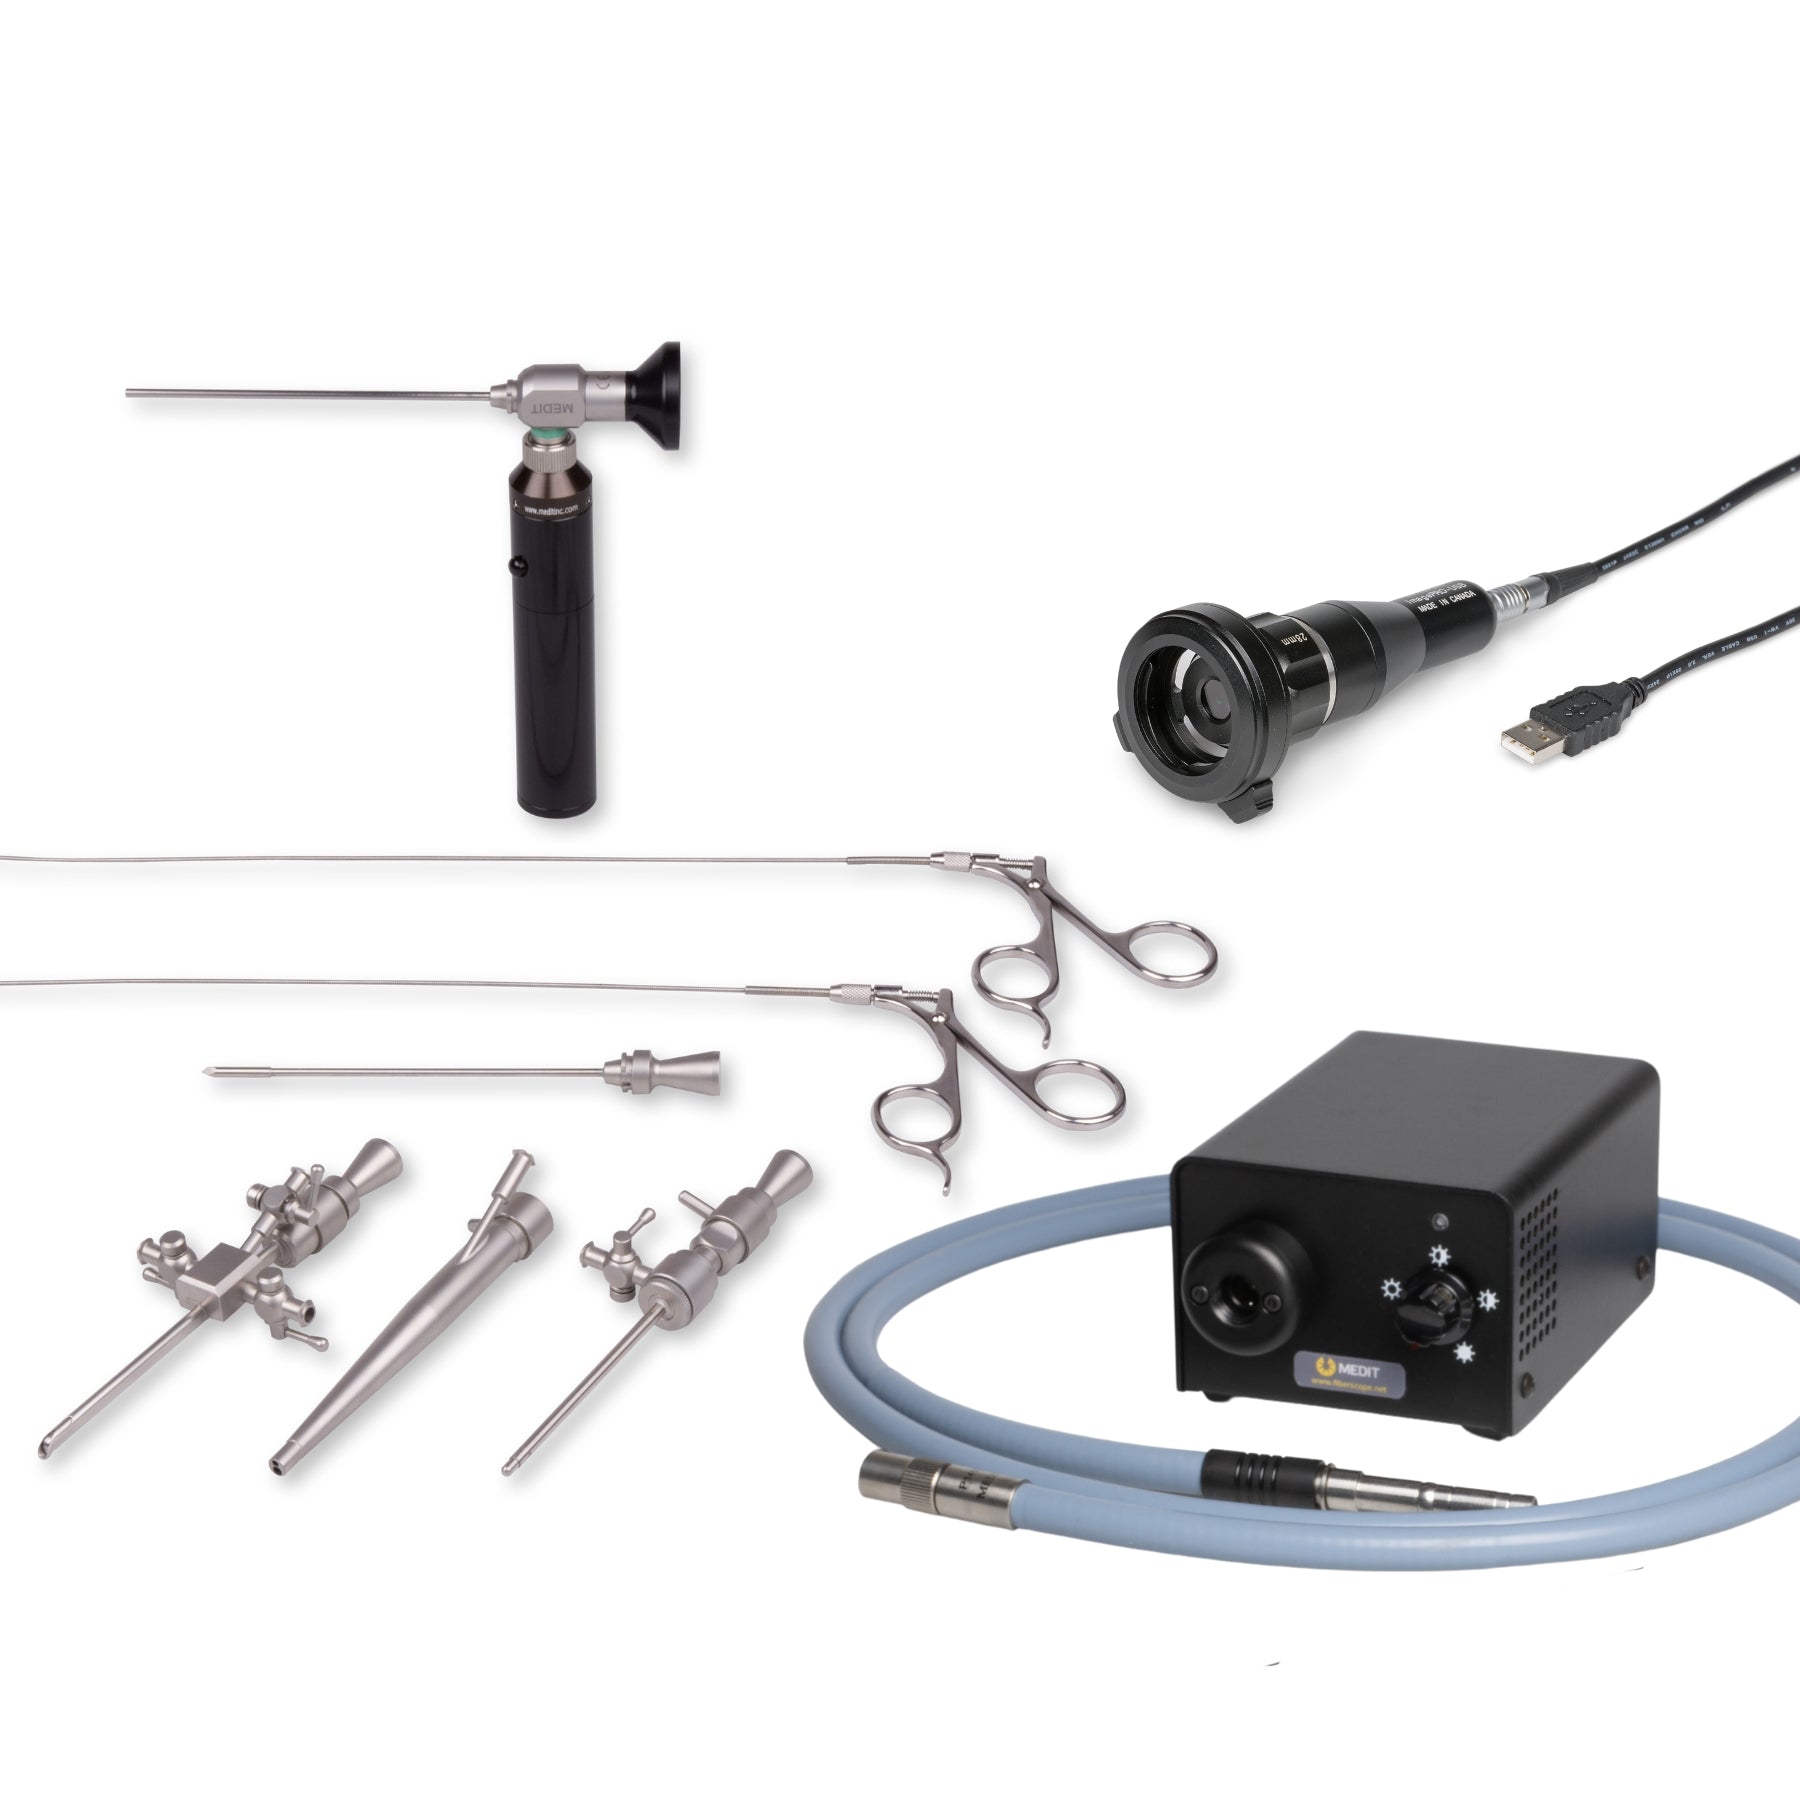 Universal Veterinary Endoscopic Set with USB Camera and MS LED Light Source